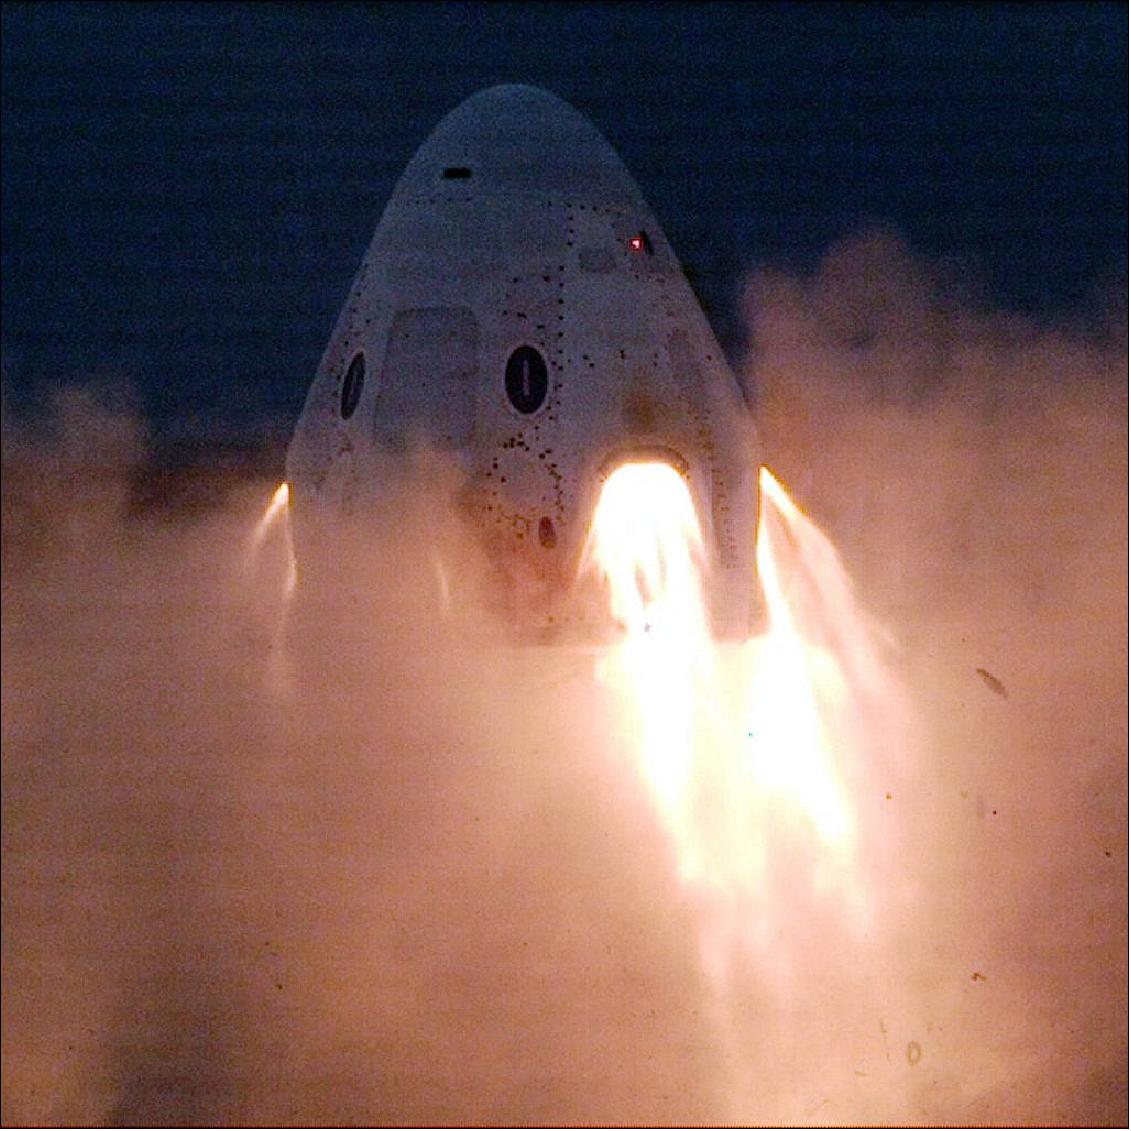 SpaceX's Crew Dragon spacecraft suffers an anomaly during static